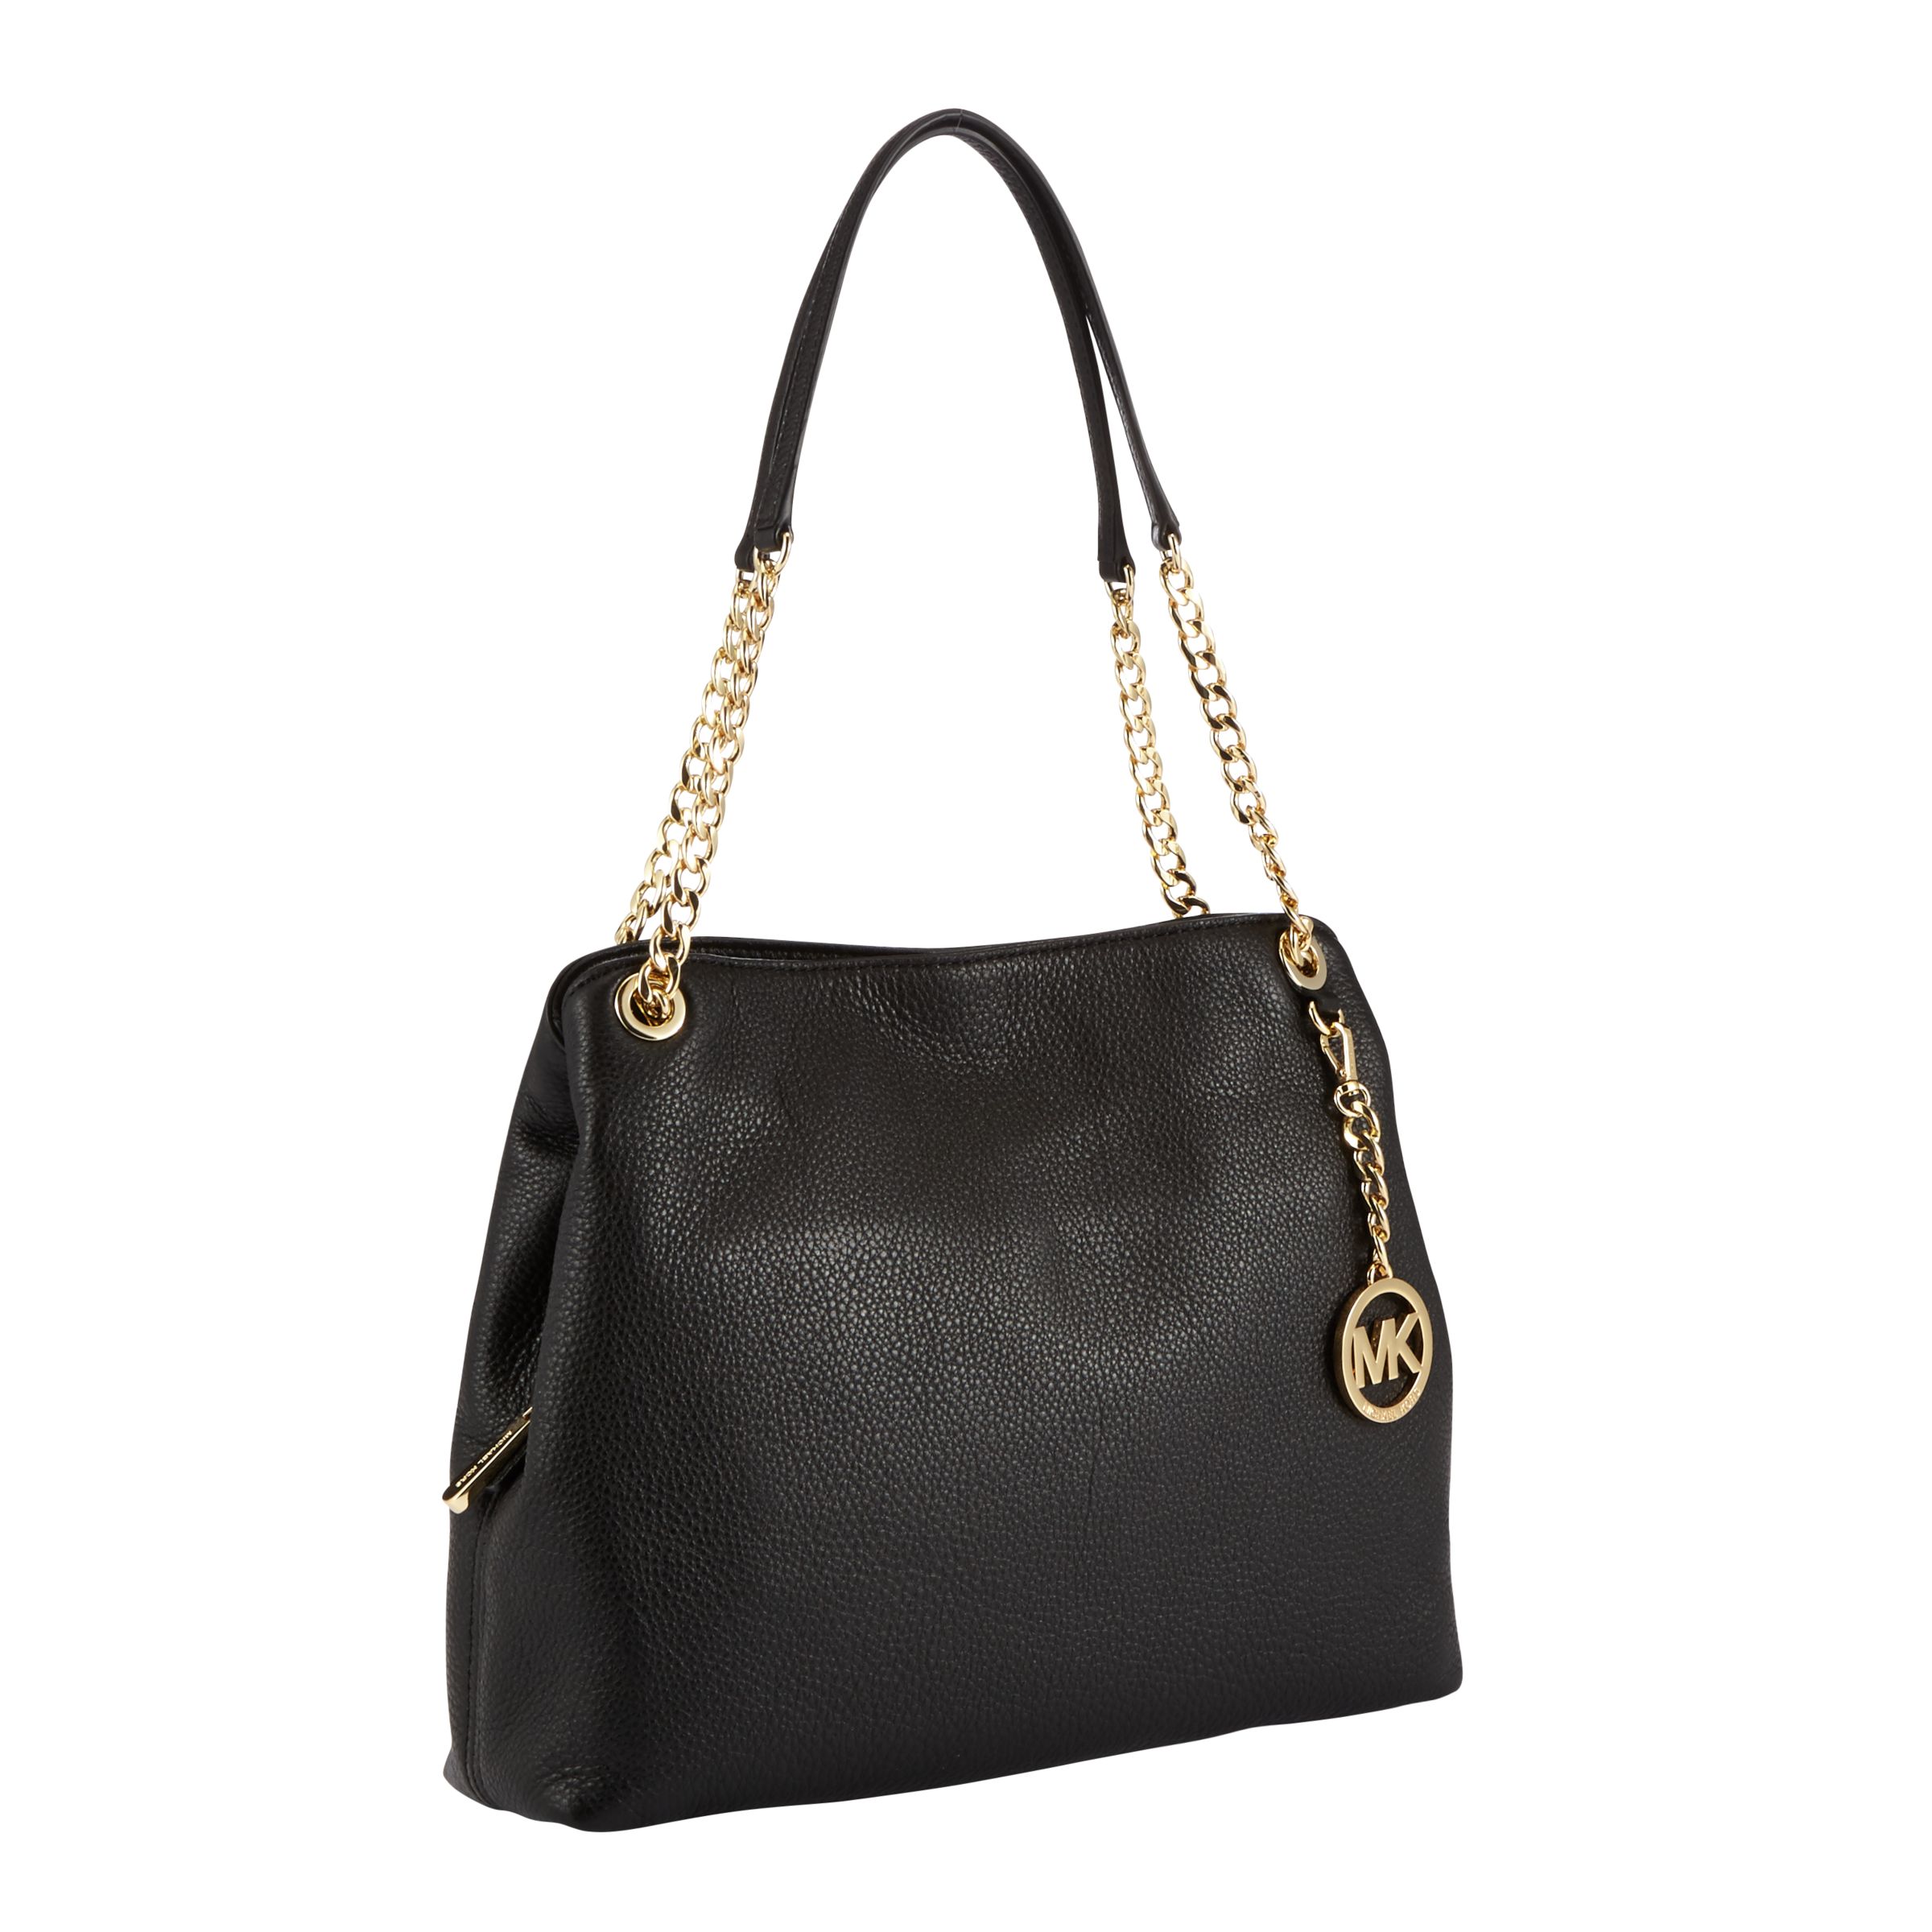 michael kors tote with chain handles